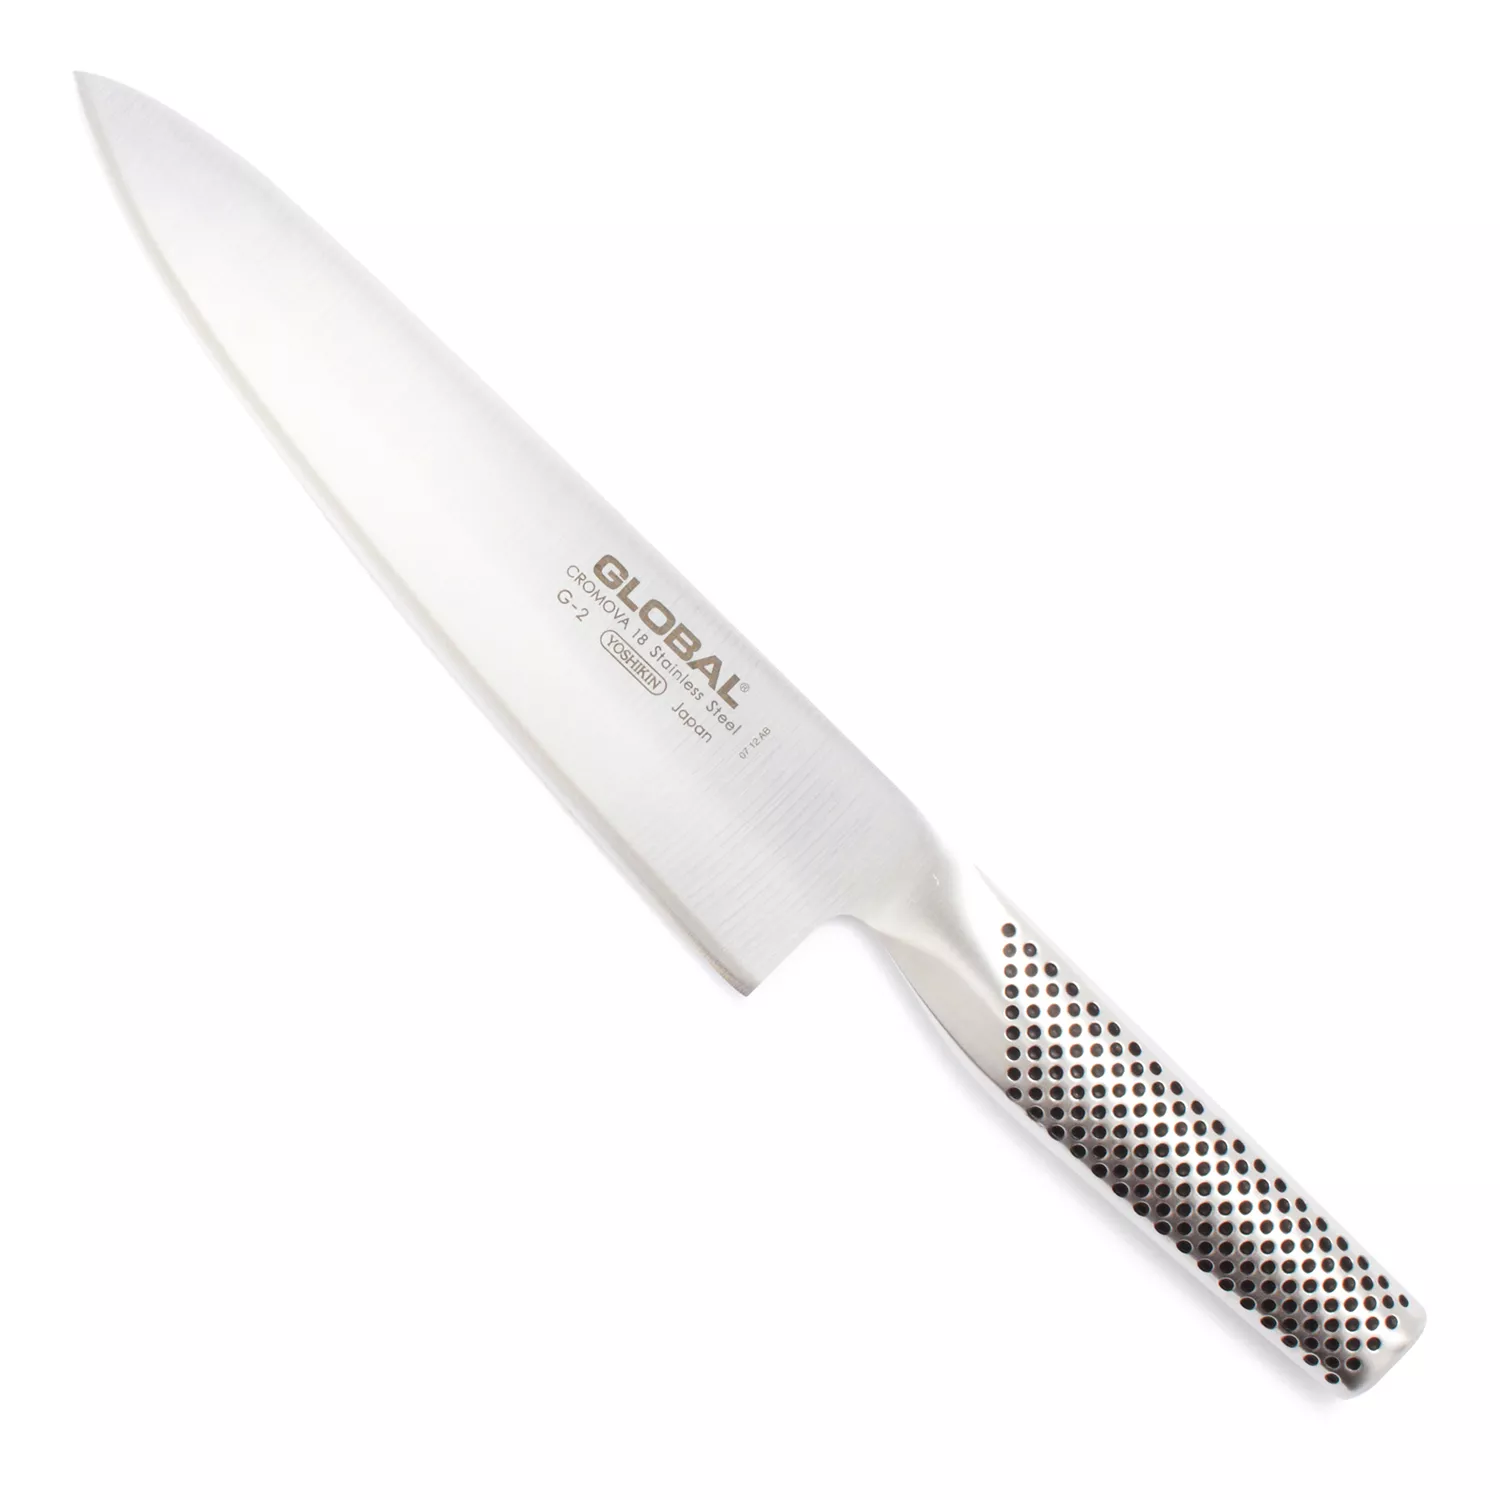 Up your cooking game with 70% off Japanese chef's knives